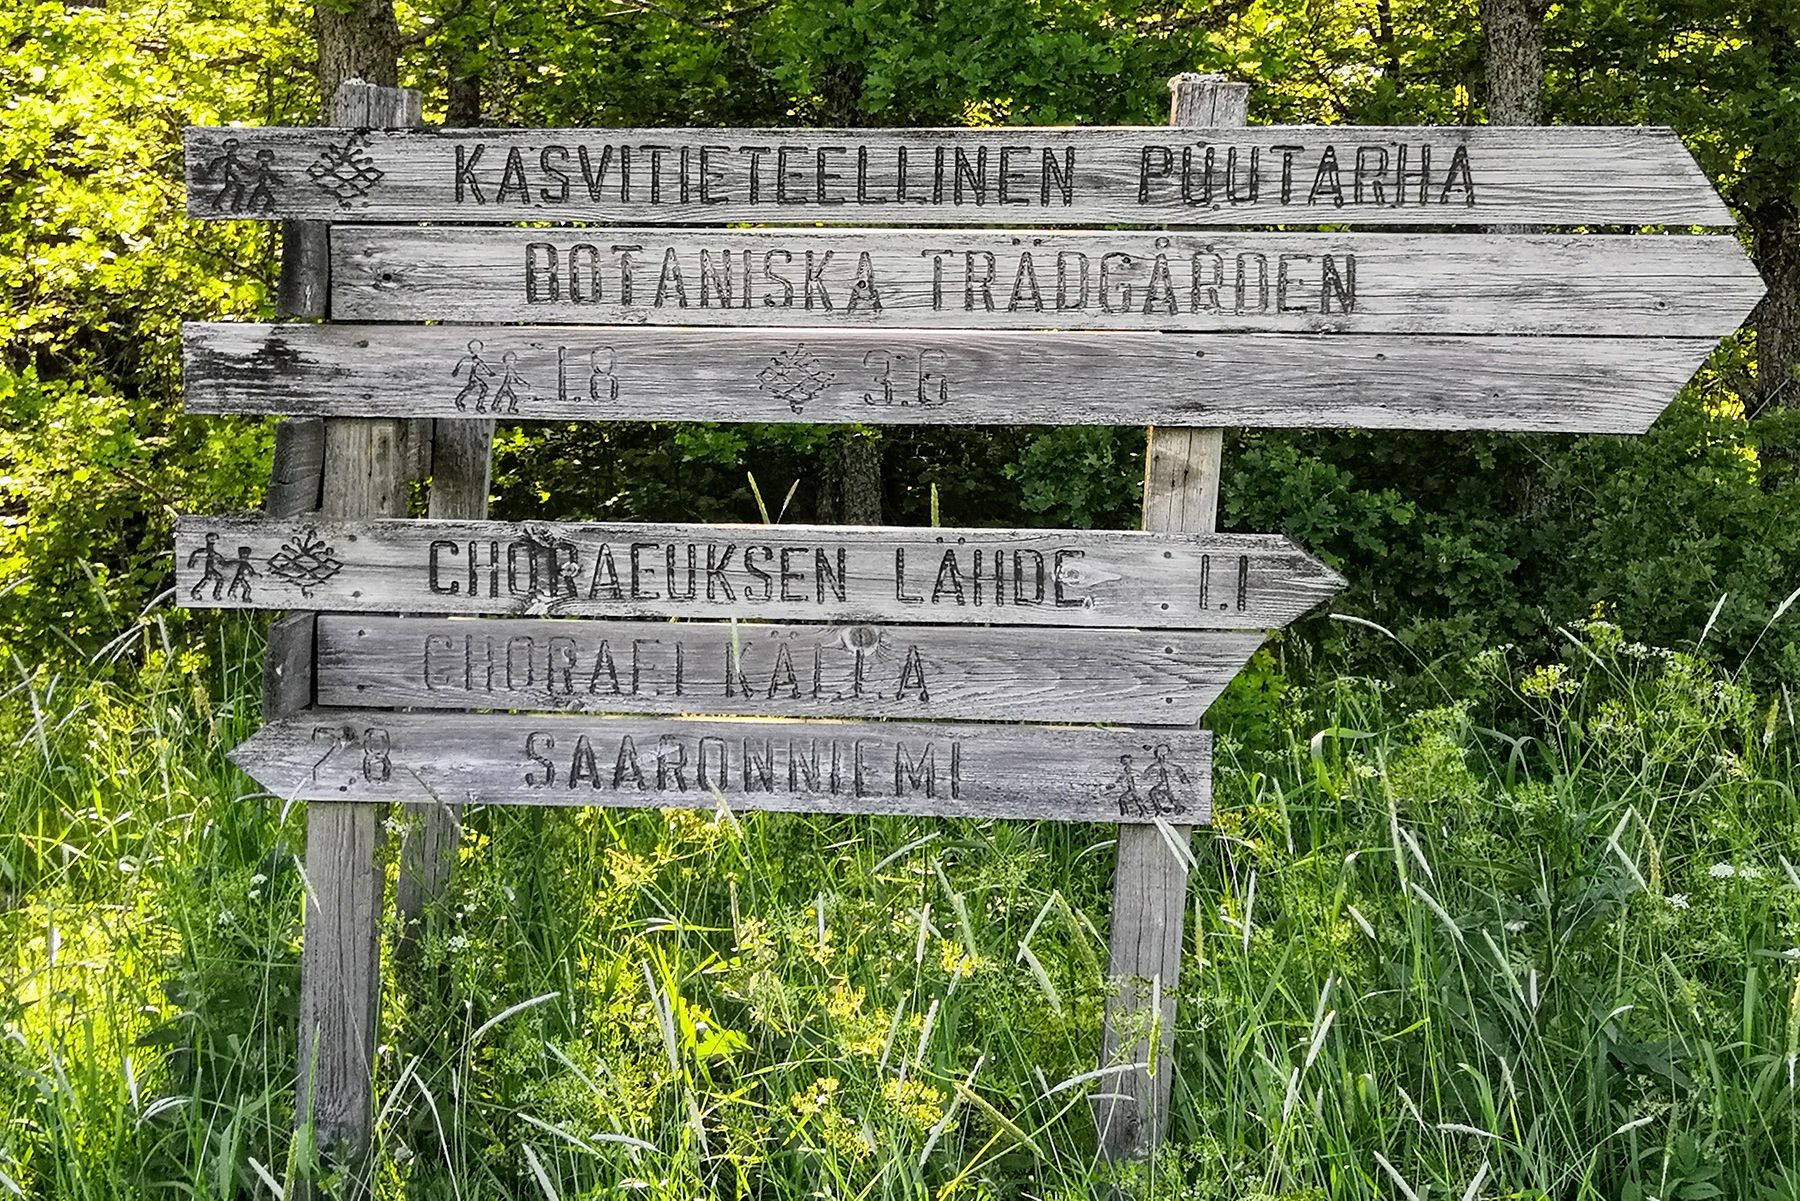 A wooden signpost points the way on the island of Ruissalo.